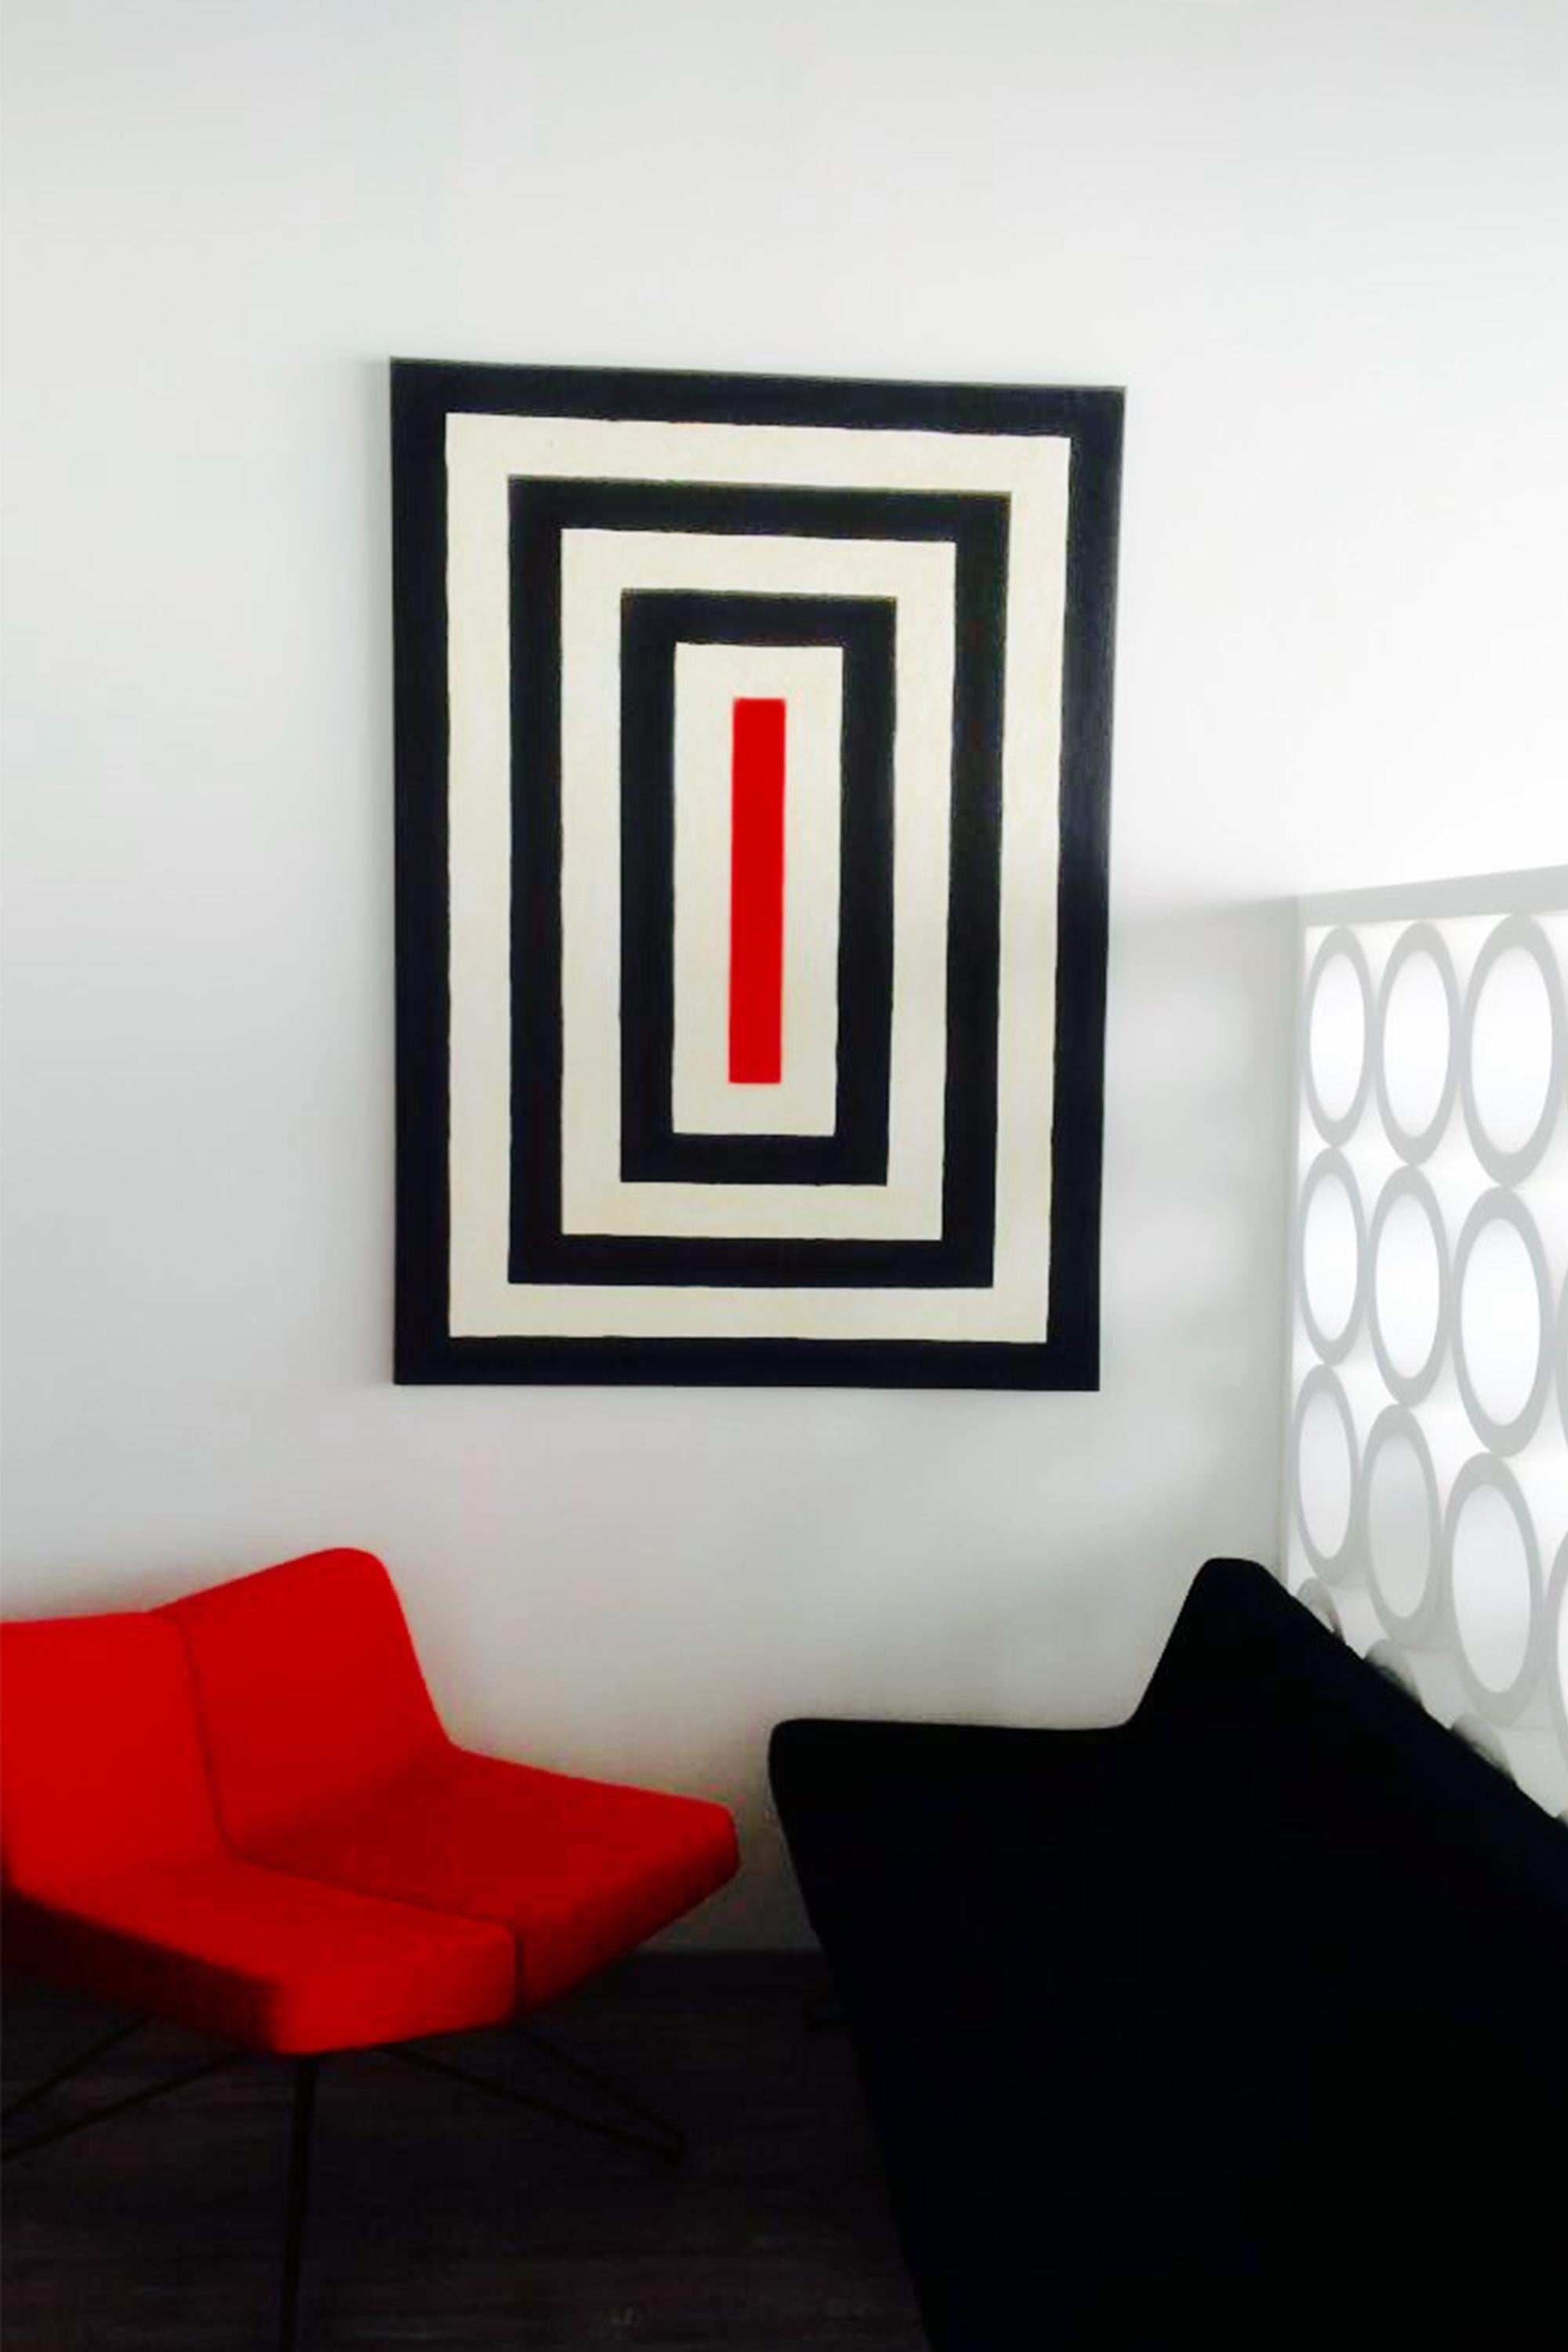 About the painting “Middle” 
Strict and simple geometrical lines that focus on the RED centre.  

About the artist: 
Cecilia’s is working with all geometrical forms, lines and shadows.  
Her style developed to be clean and sharp forms in different